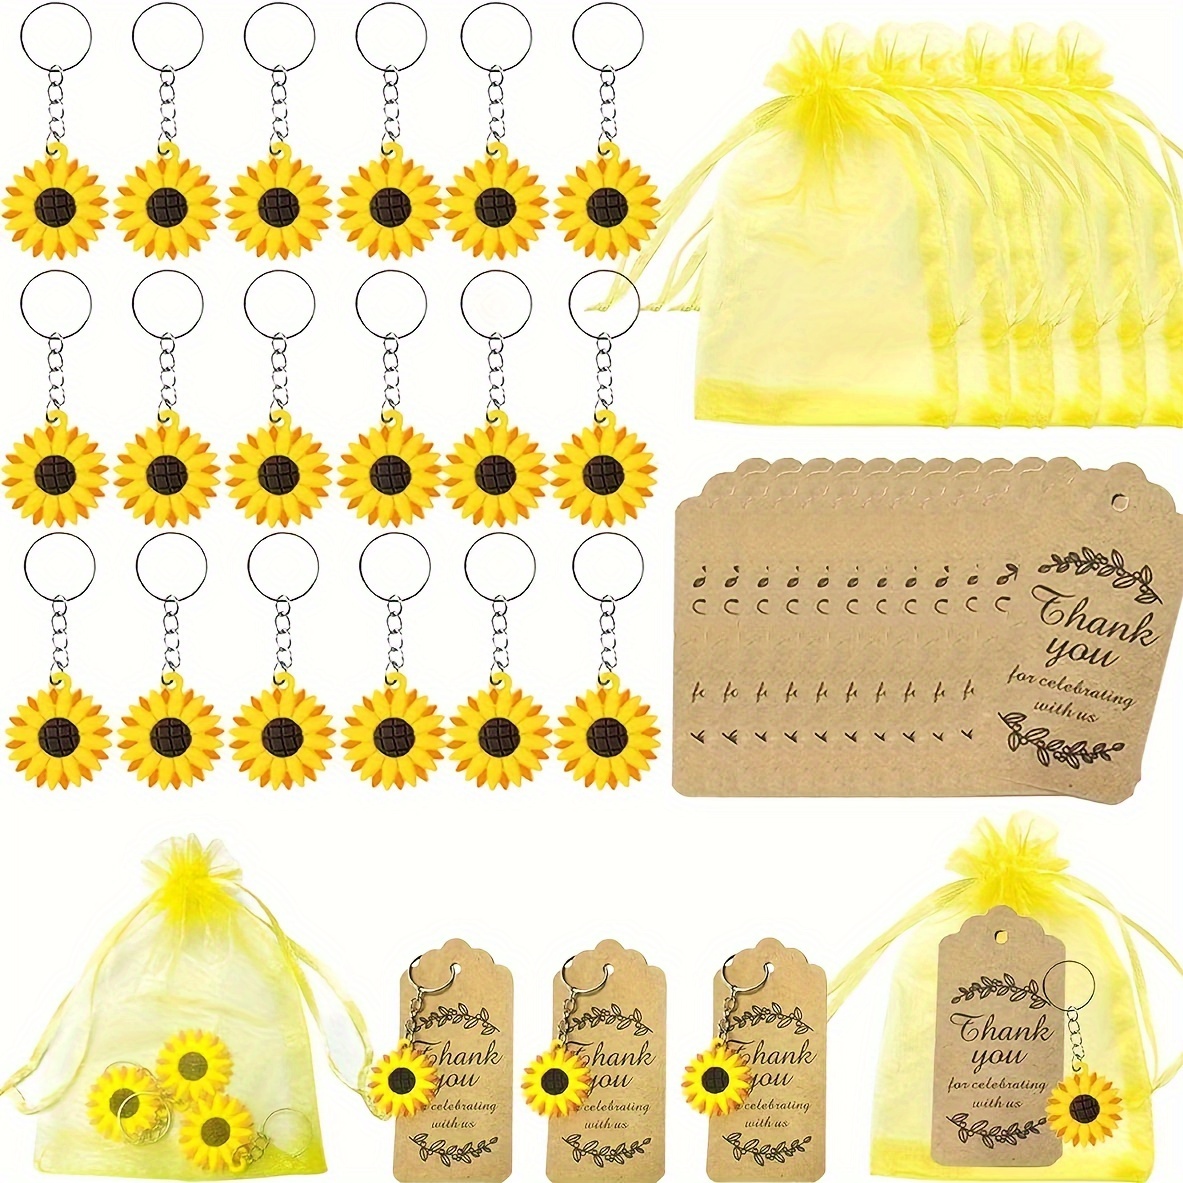 

54-piece Sunflower Keychain Favor Set - Pvc Material, Includes 18 Sunflower Key Rings, 18 Organza Bags, 18 Thank You Gift Tags For Party Supplies, Shower, School Awards, Birthday And Wedding Giveaways